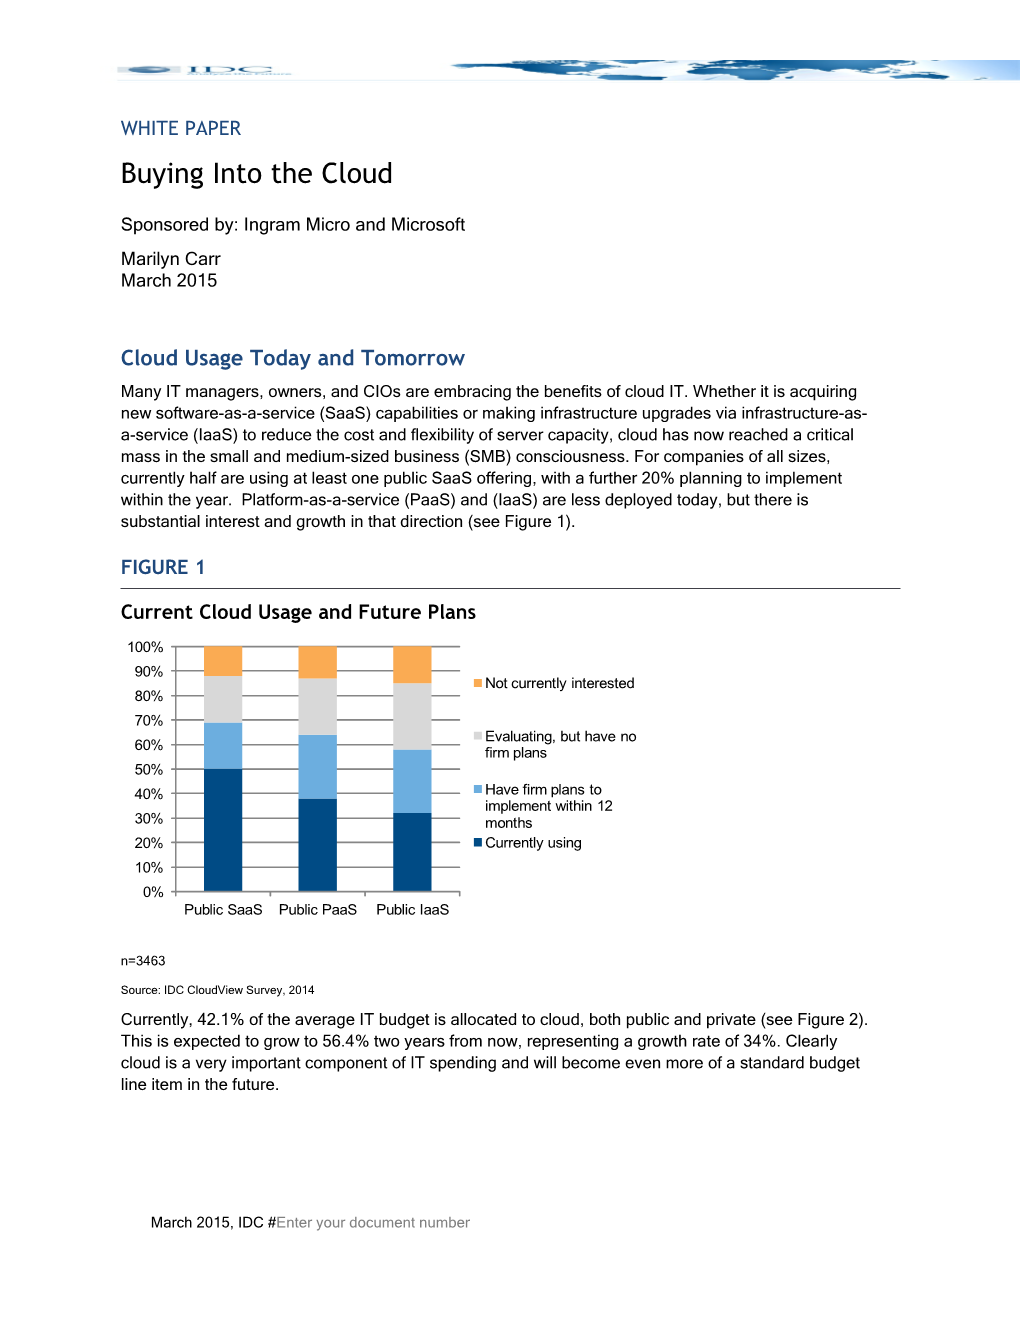 Buying Into the Cloud